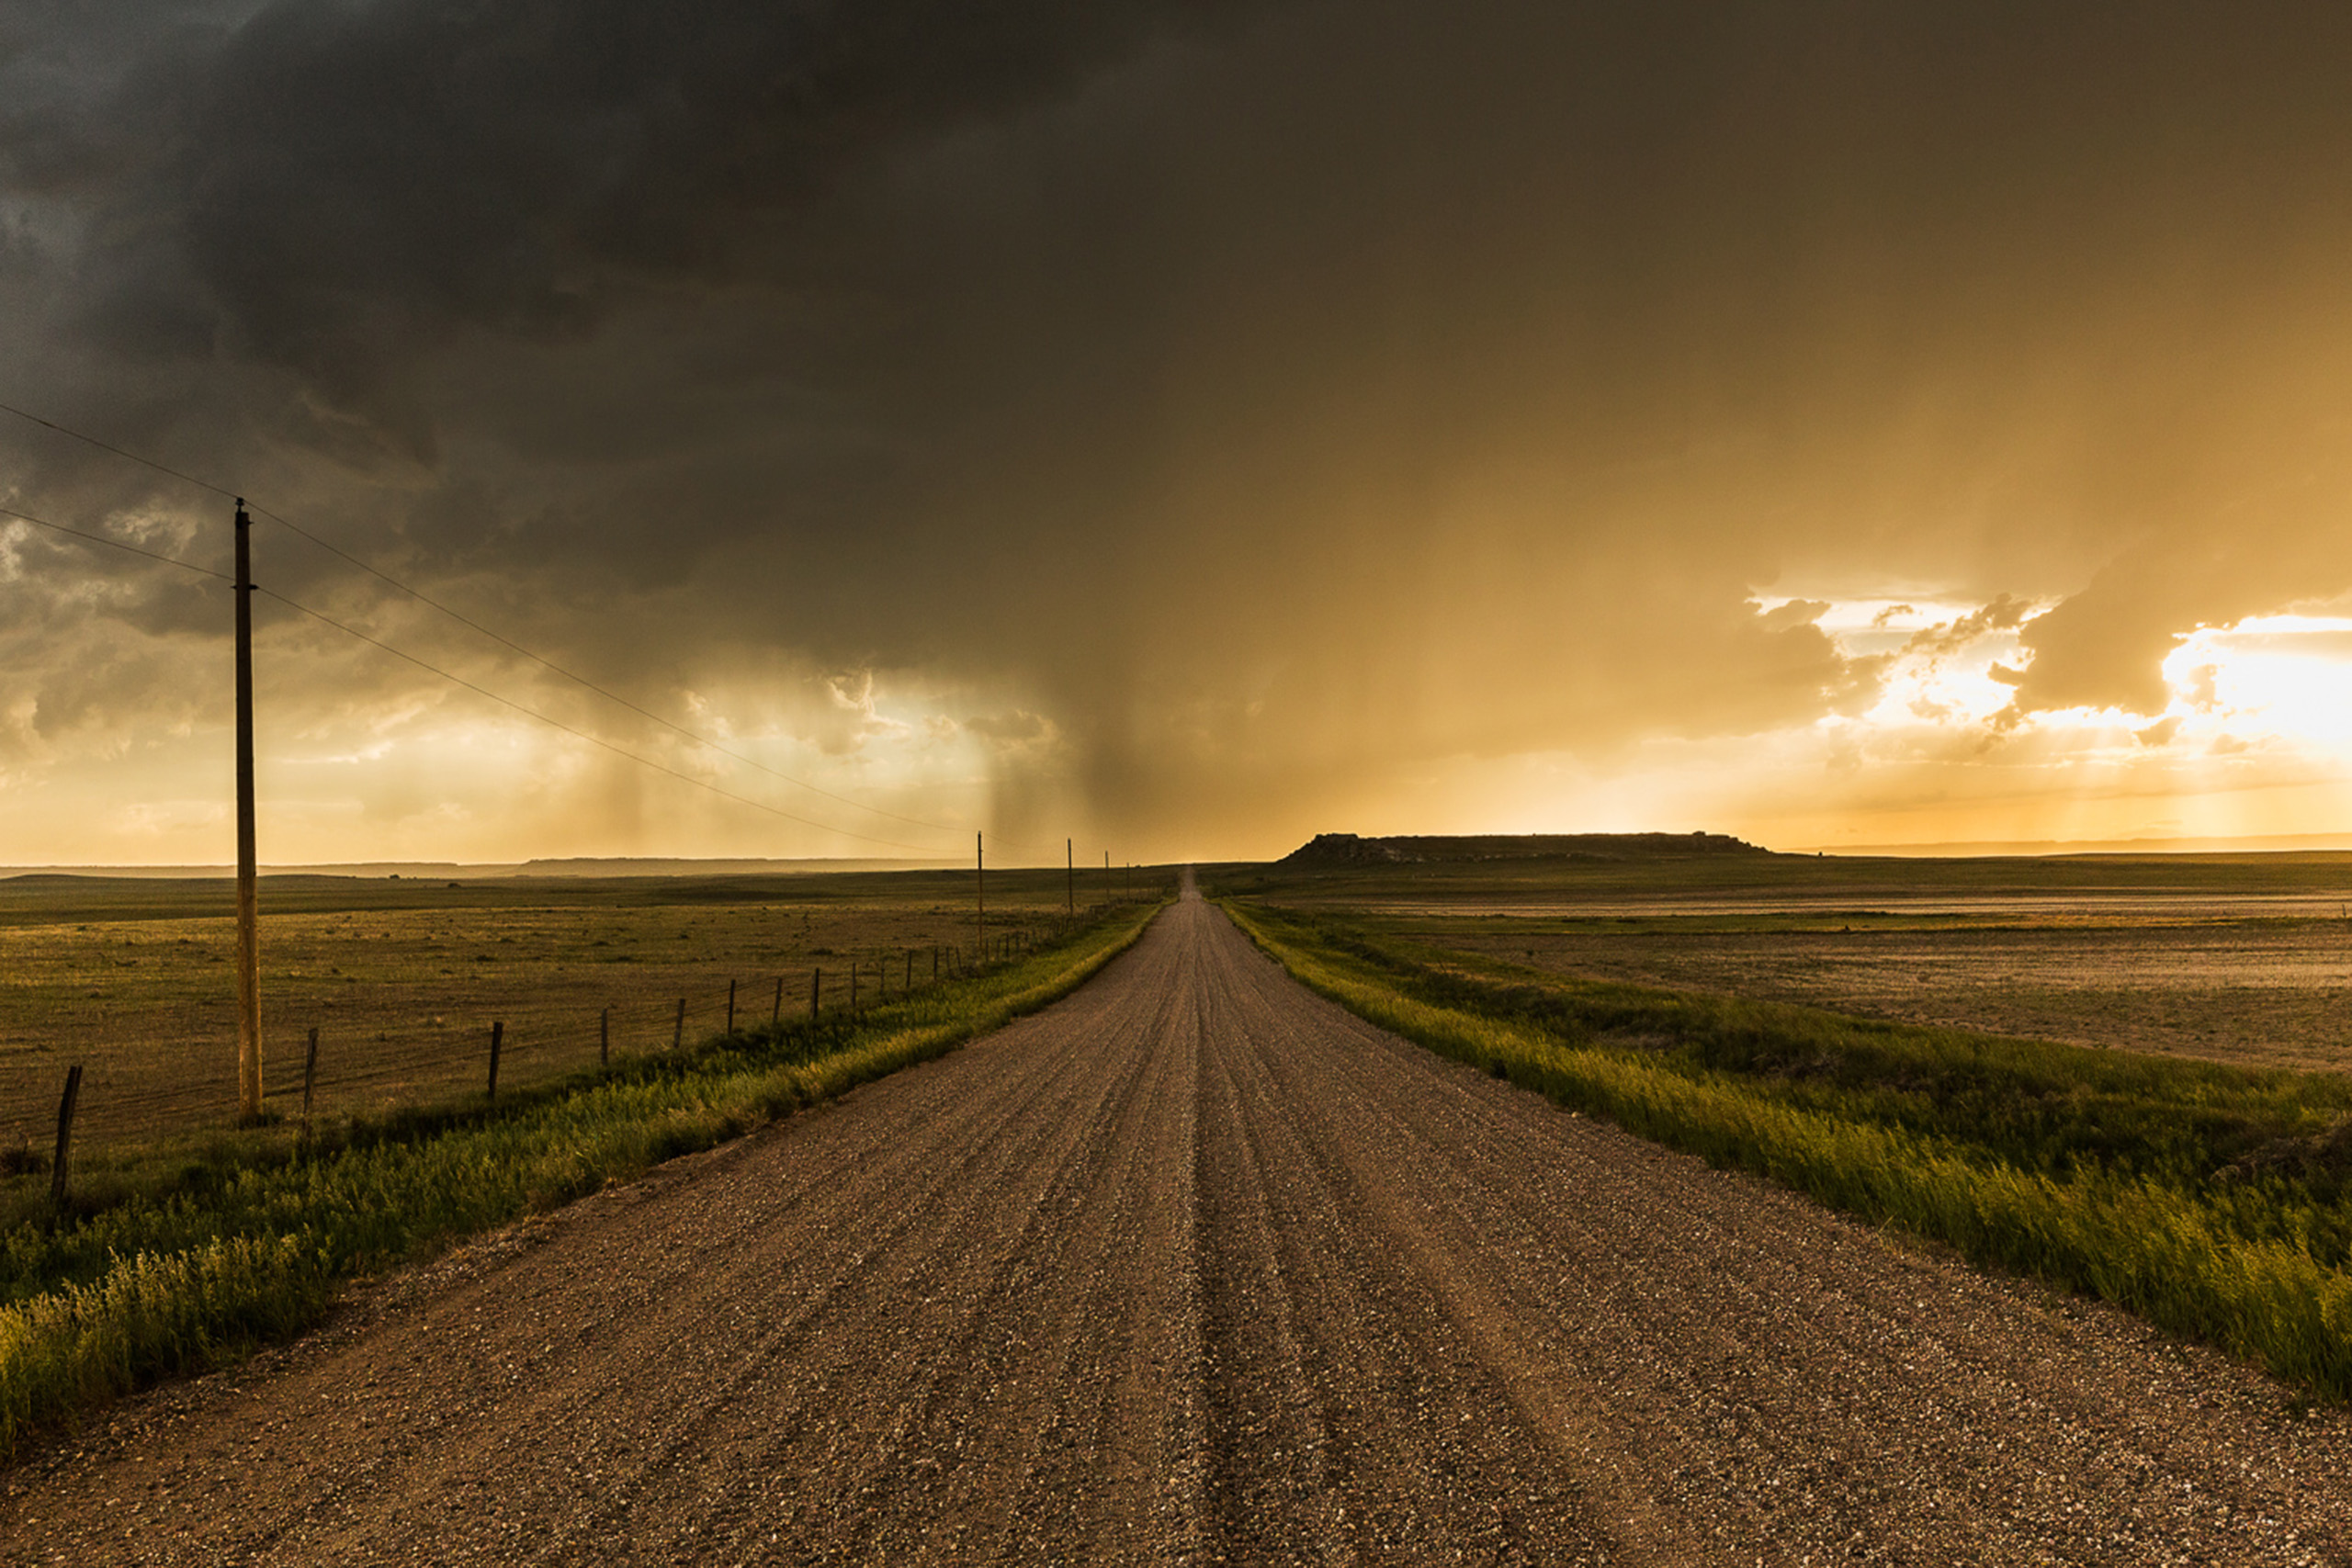 Precipitation descends from the base of a supercell near Wheatland, Wyoming.